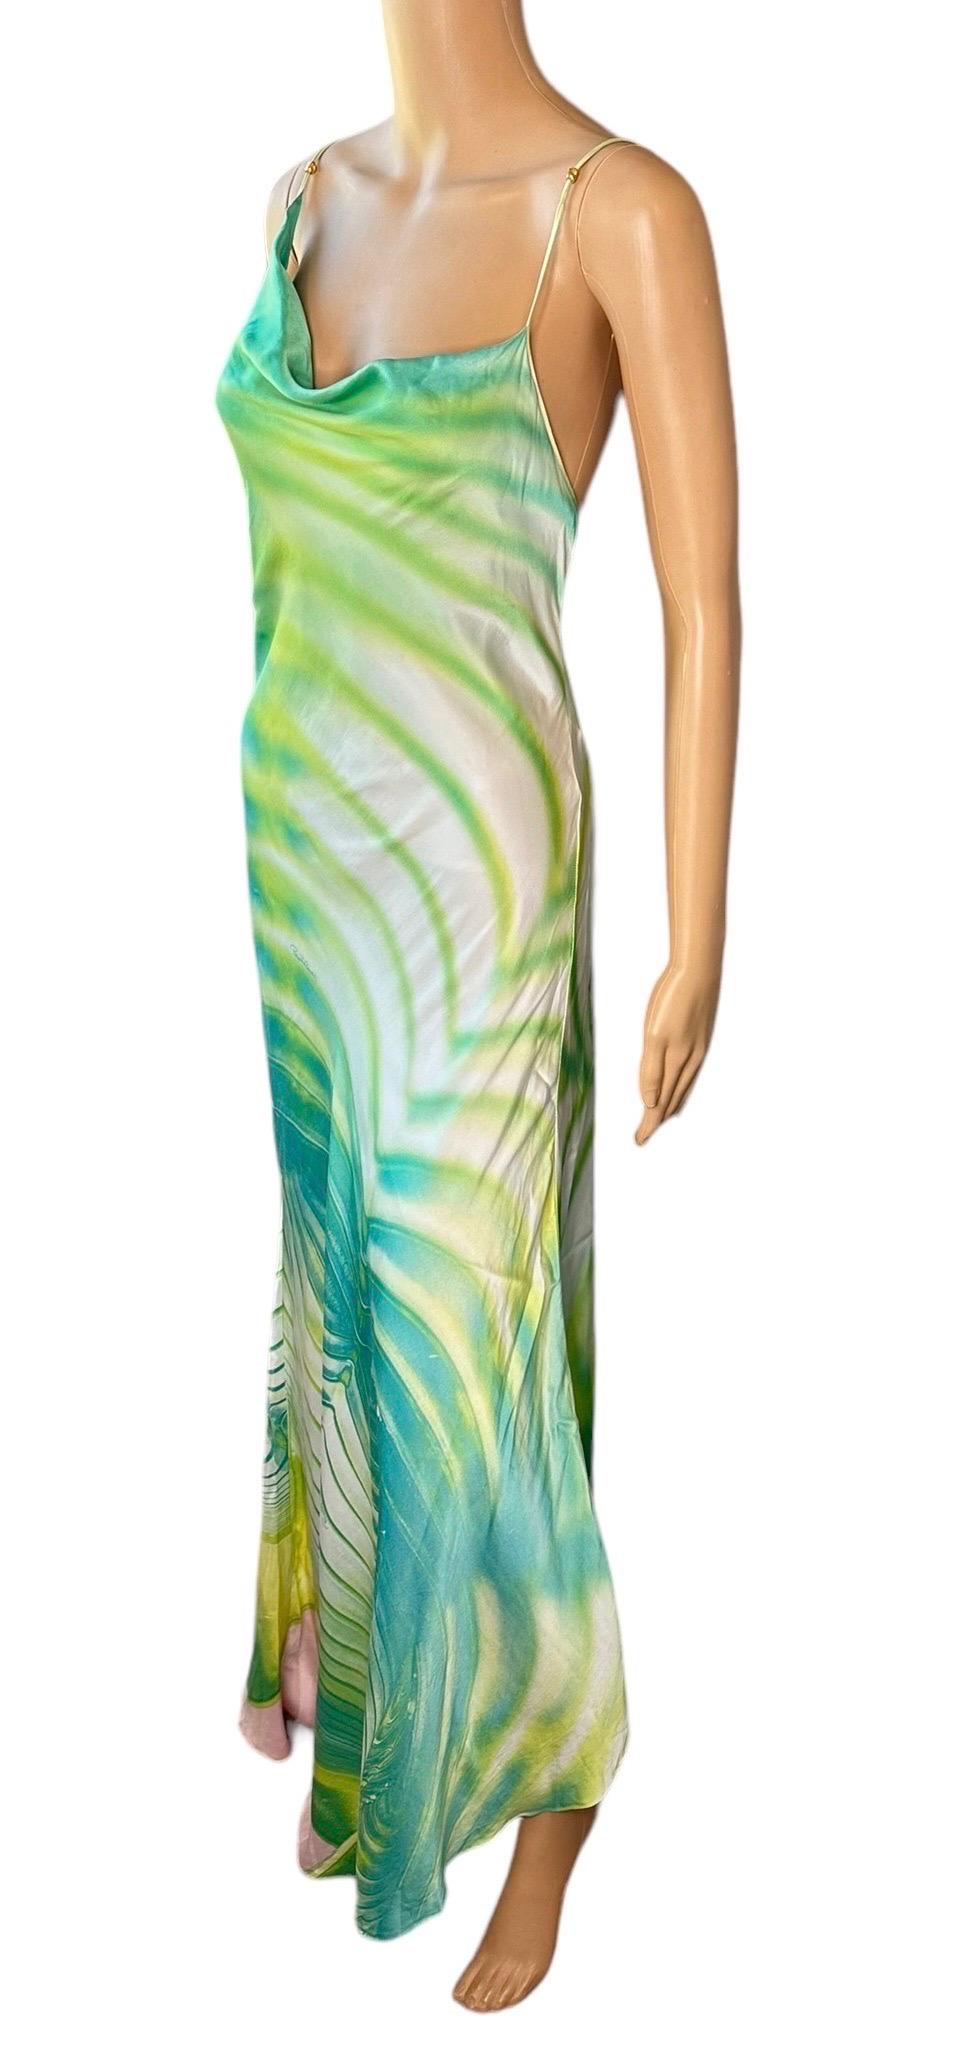 Roberto Cavalli S/S 2001 Psychedelic Print Silk Slip Maxi Evening Dress Gown For Sale 1